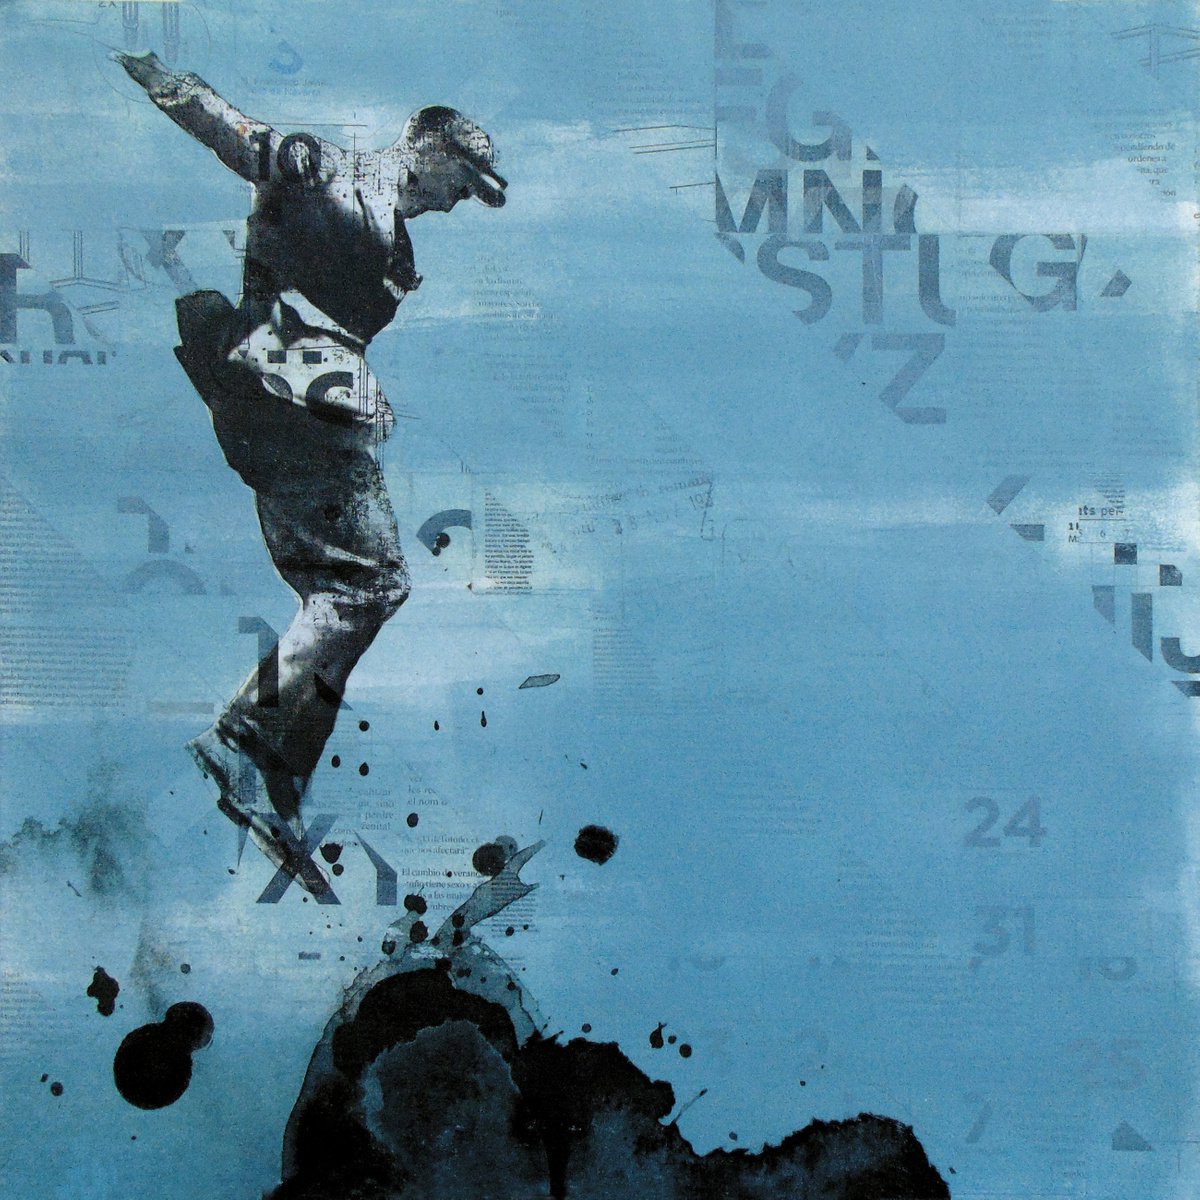 Collage_54_50x50 cm_The abyss by Manel Villalonga